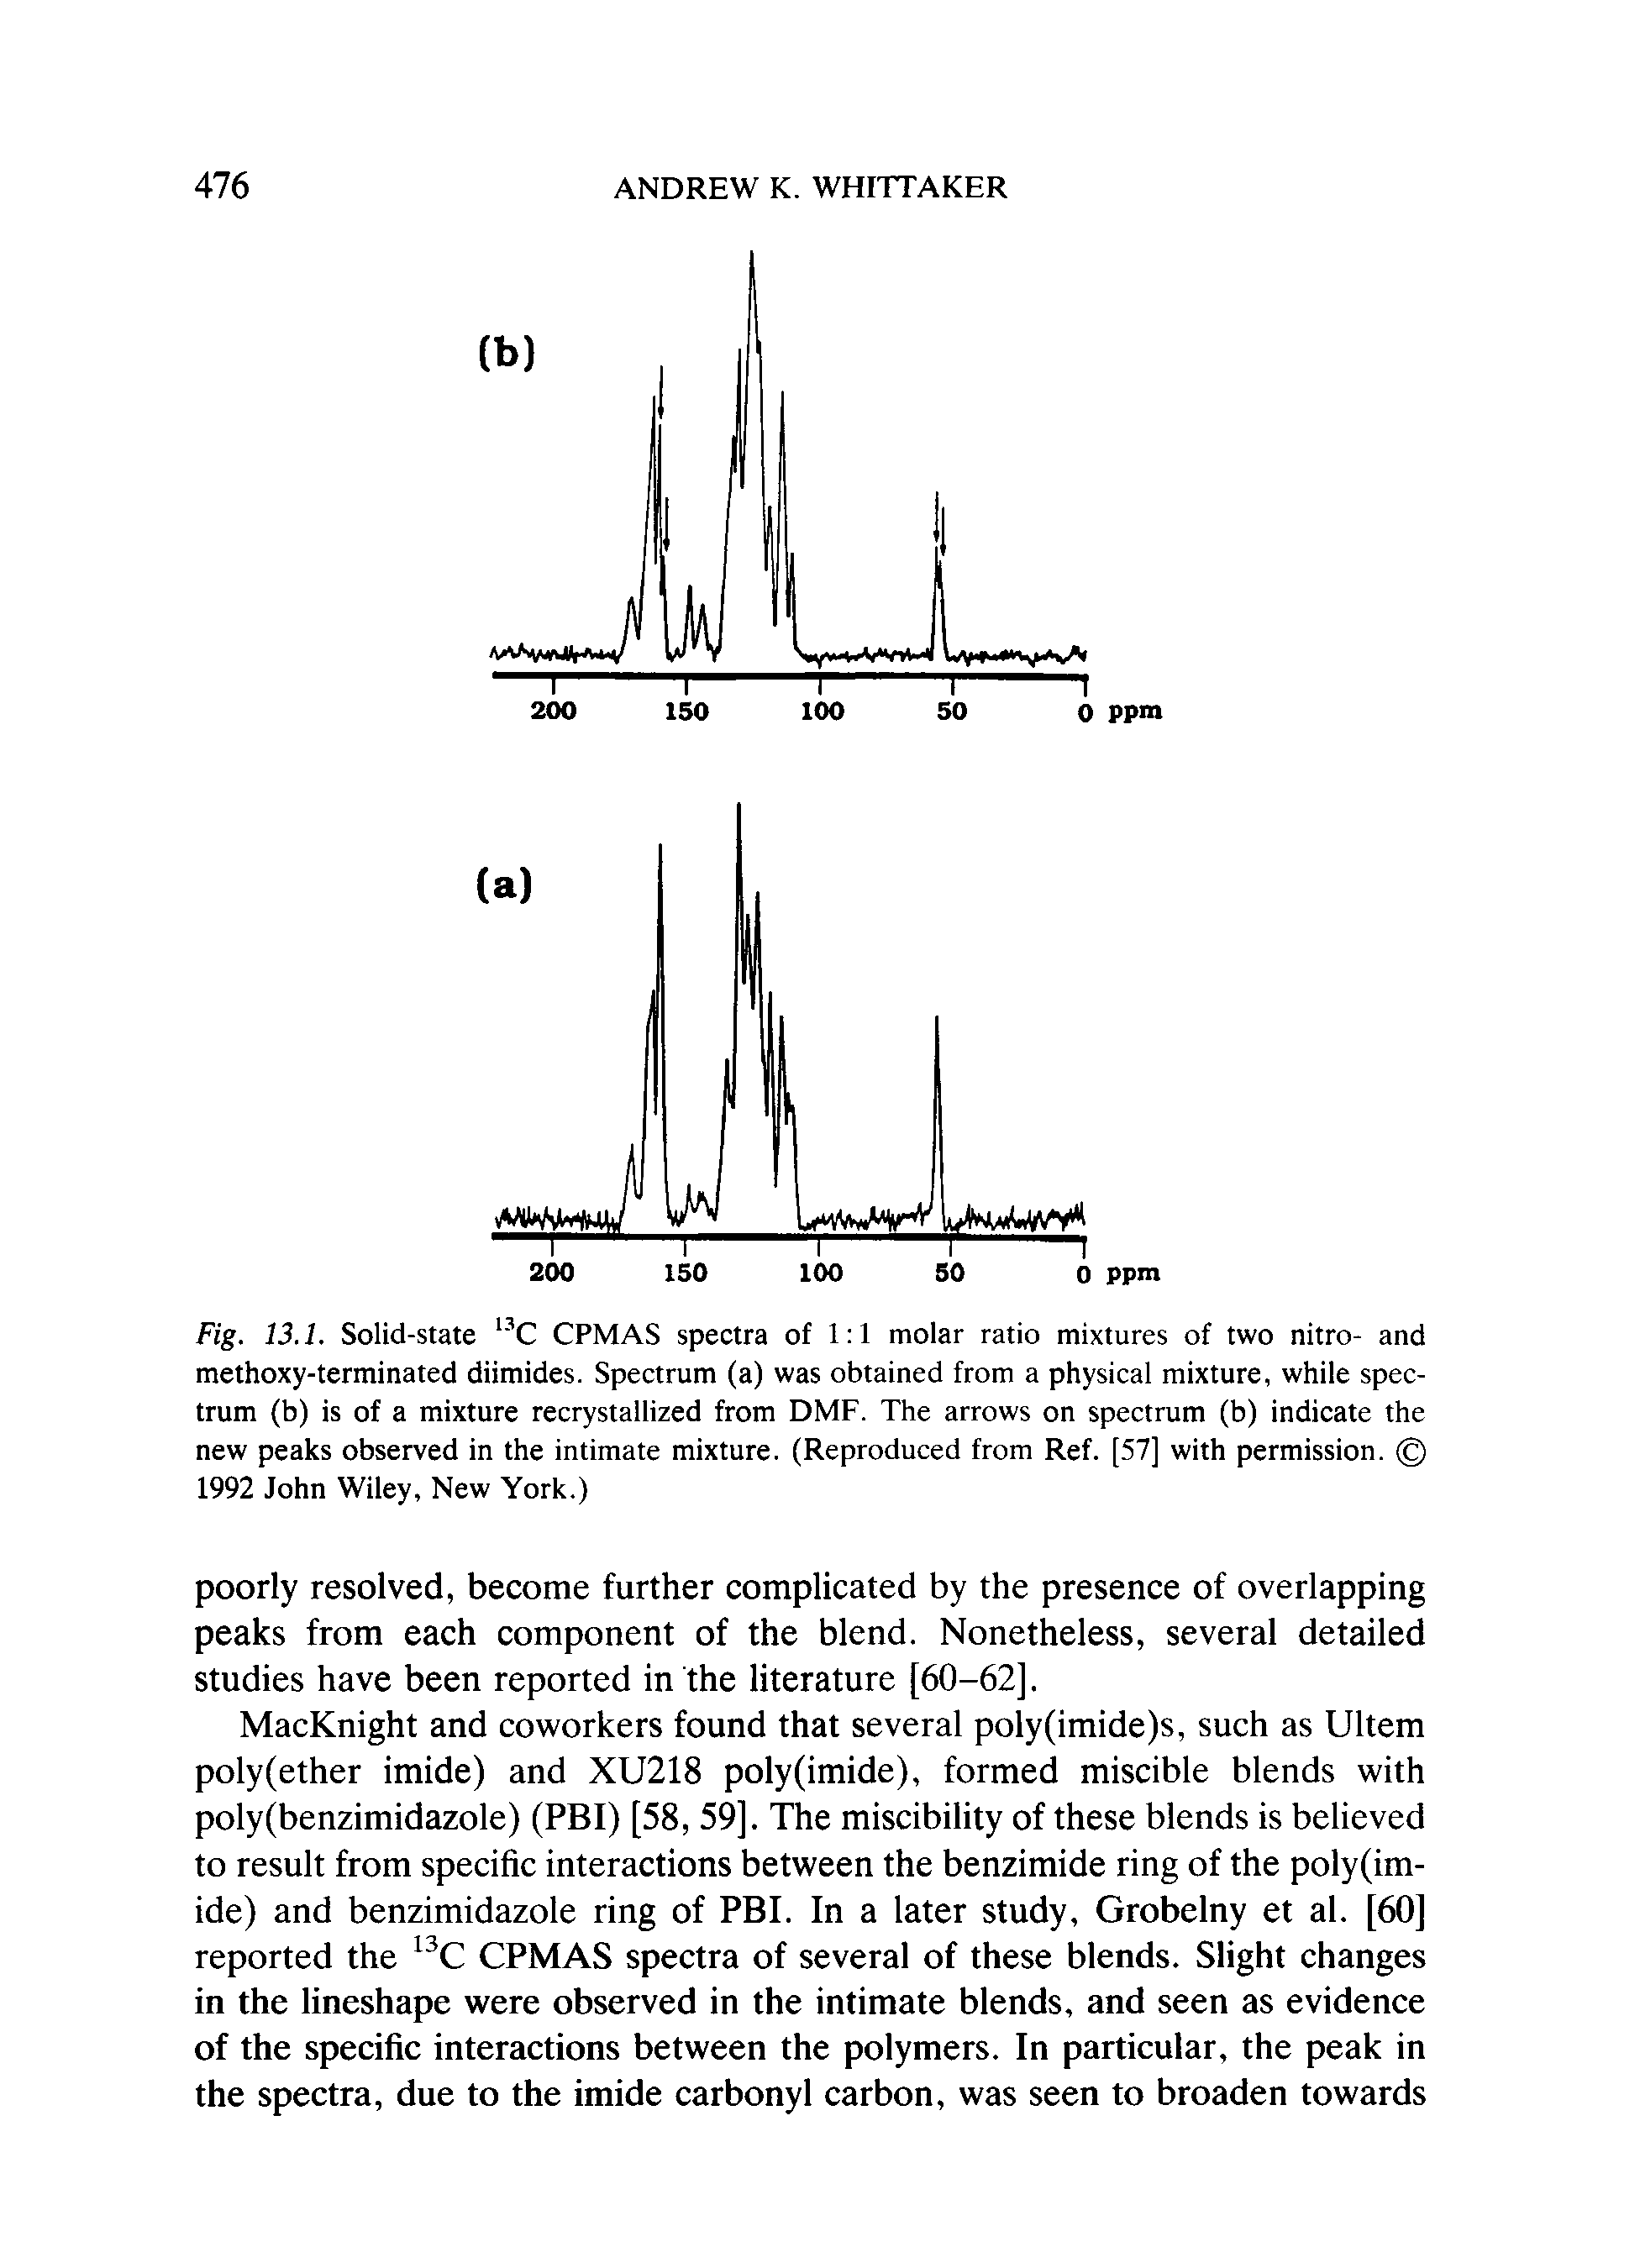 Fig. 13.1. Solid-state C CPMAS spectra of 1 1 molar ratio mixtures of two nitro- and methoxy-terminated diimides. Spectrum (a) was obtained from a physical mixture, while spectrum (b) is of a mixture recrystallized from DMF. The arrows on spectrum (b) indicate the new peaks observed in the intimate mixture. (Reproduced from Ref. [57] with permission. 1992 John Wiley, New York.)...